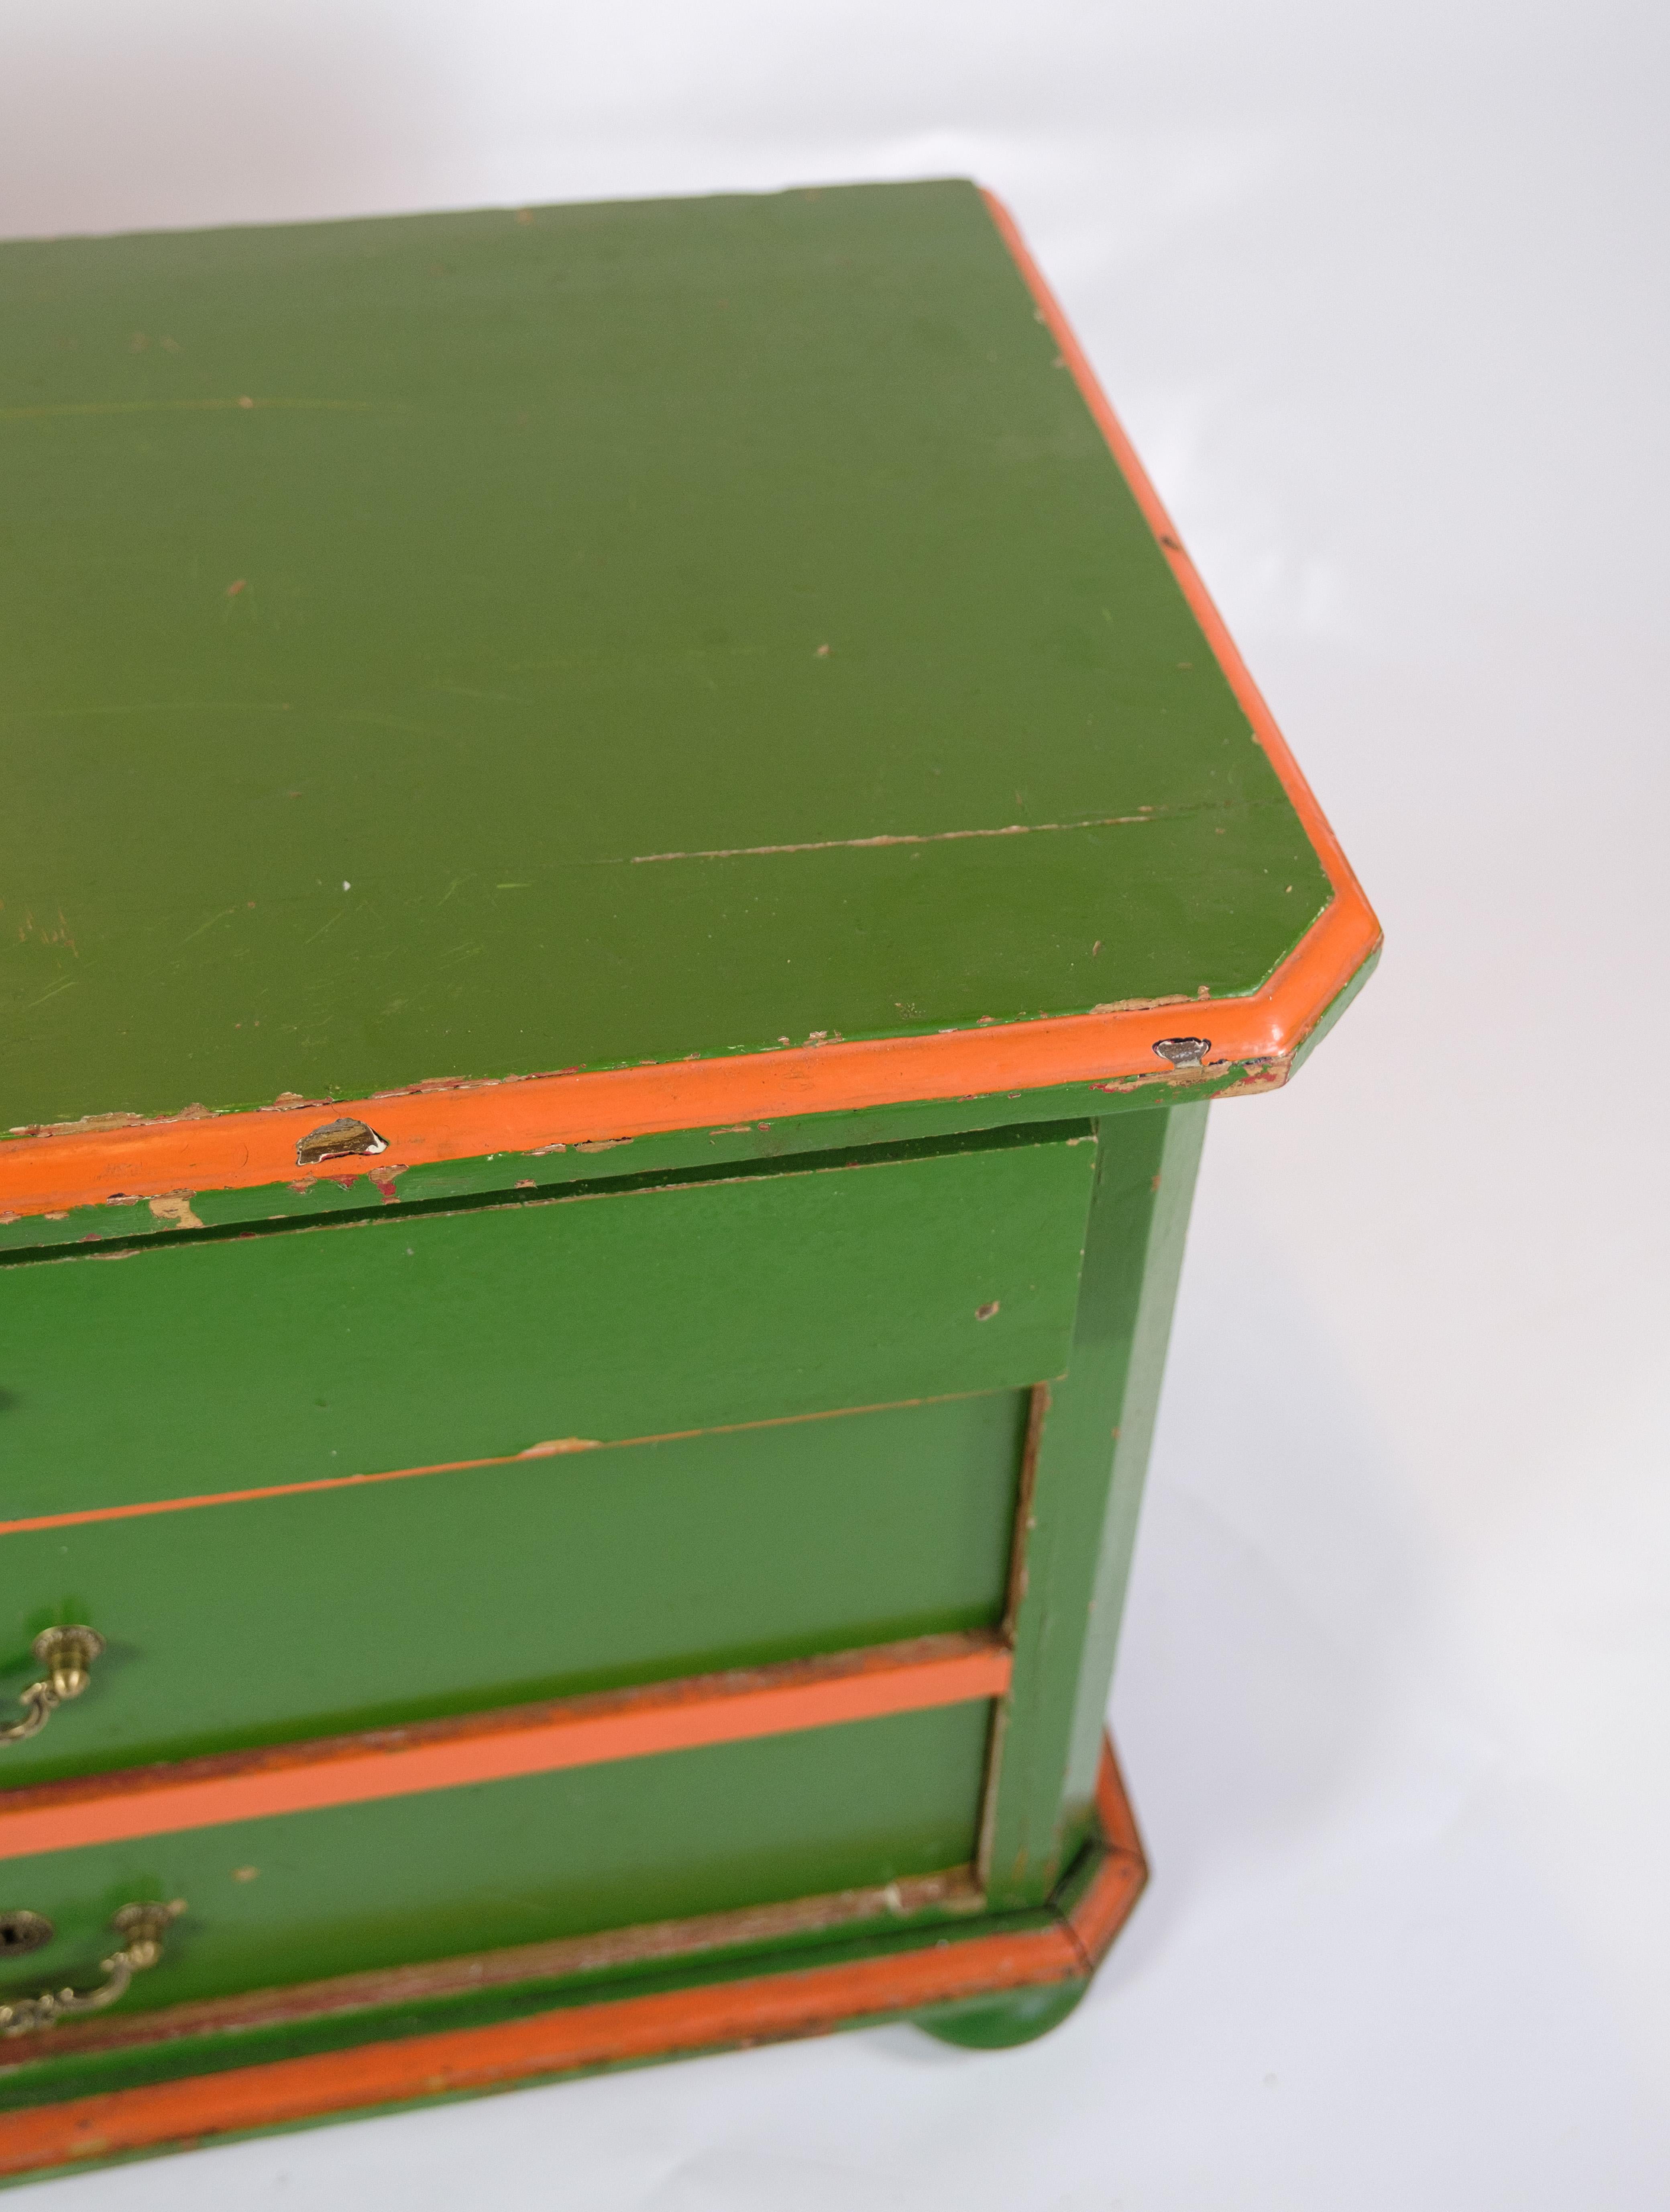 This small antique chest of drawers from approx. 1890 is a charming piece of furniture history. With its brass handles and patinated shades of green with red edges, the chest of drawers exudes a unique aesthetic and vintage charm.

The three